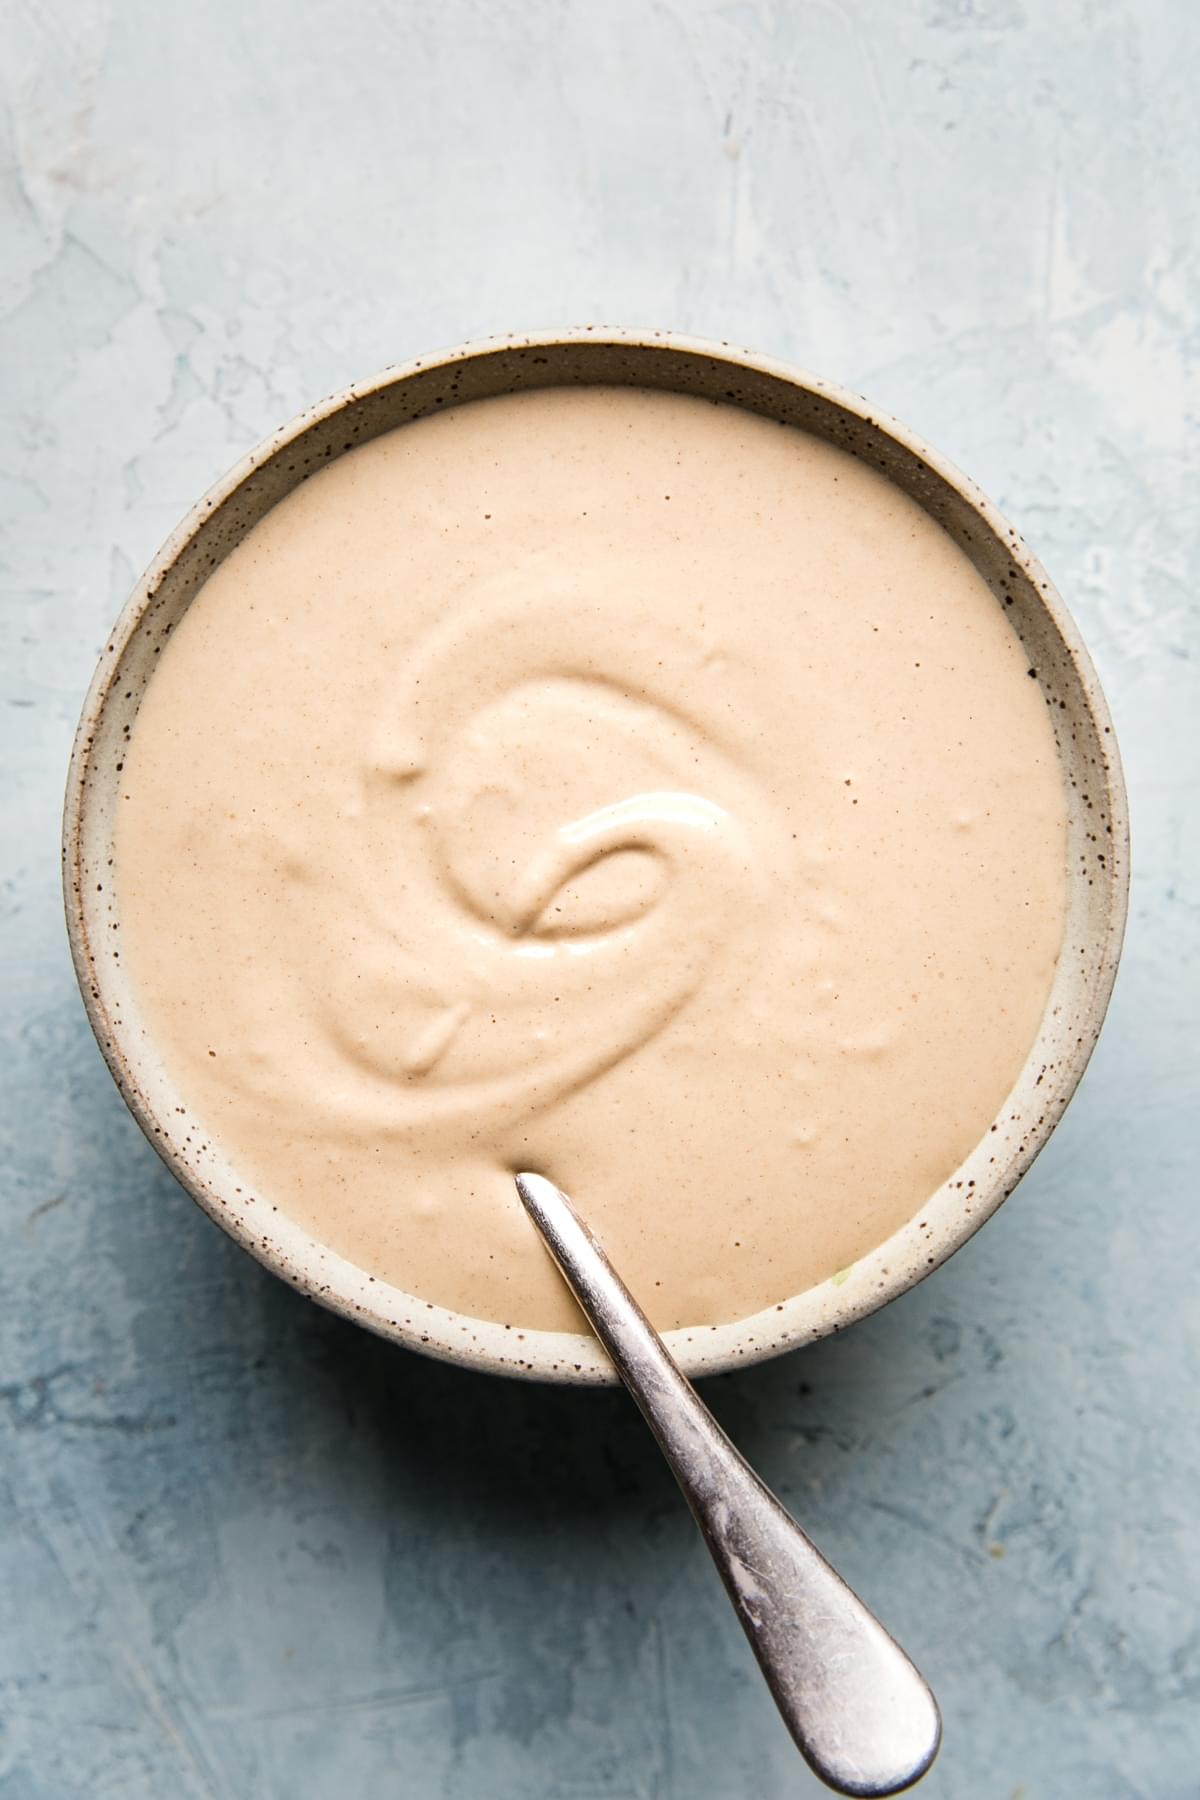 tahini sauce in a bowl with a spoon